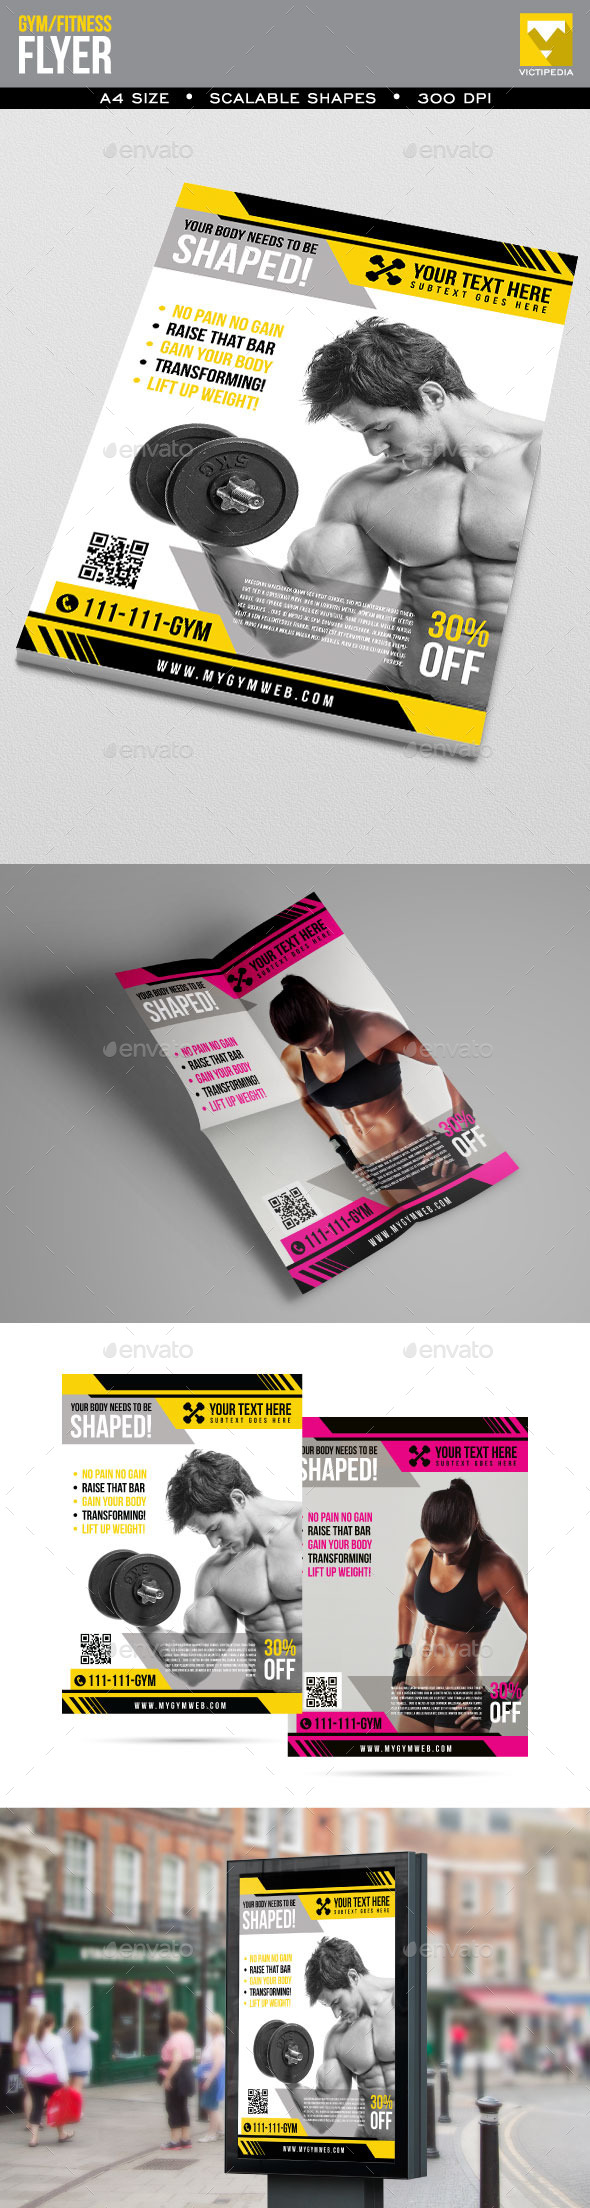 Simple Gym/Fitness Flyer